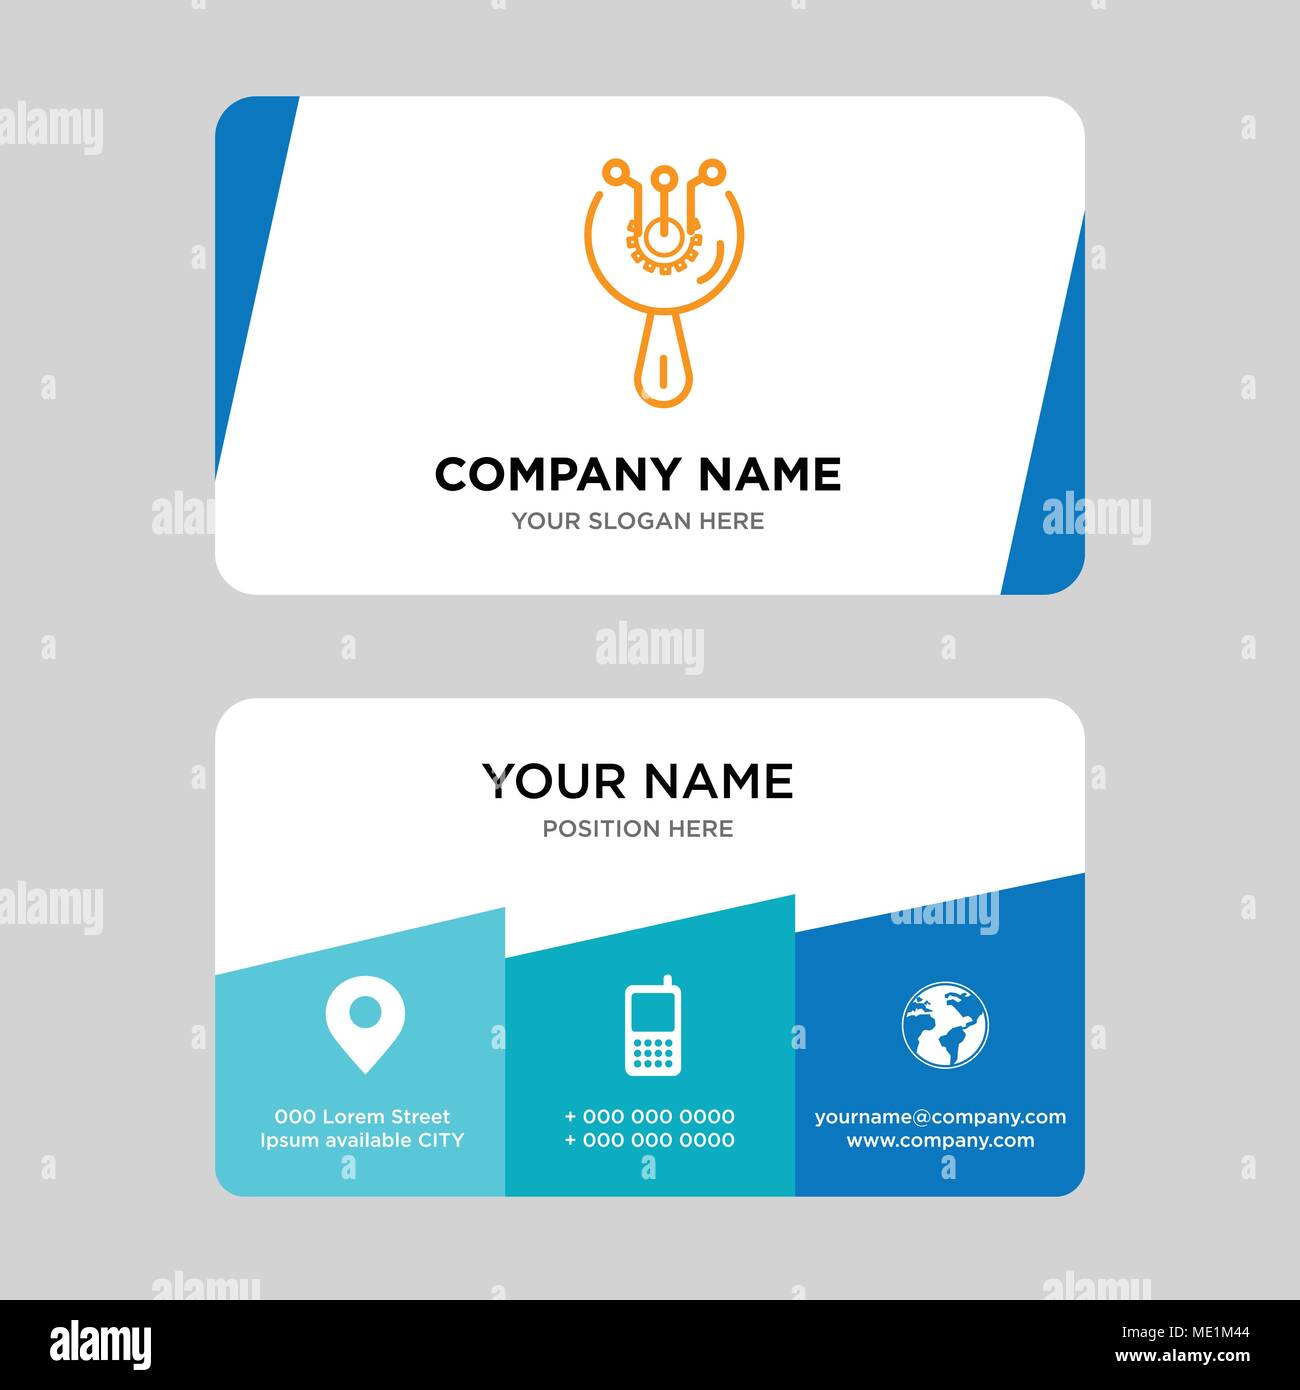 Access business card design template, Visiting for your company, Modern Creative and Clean identity Card Vector Illustration Stock Vector